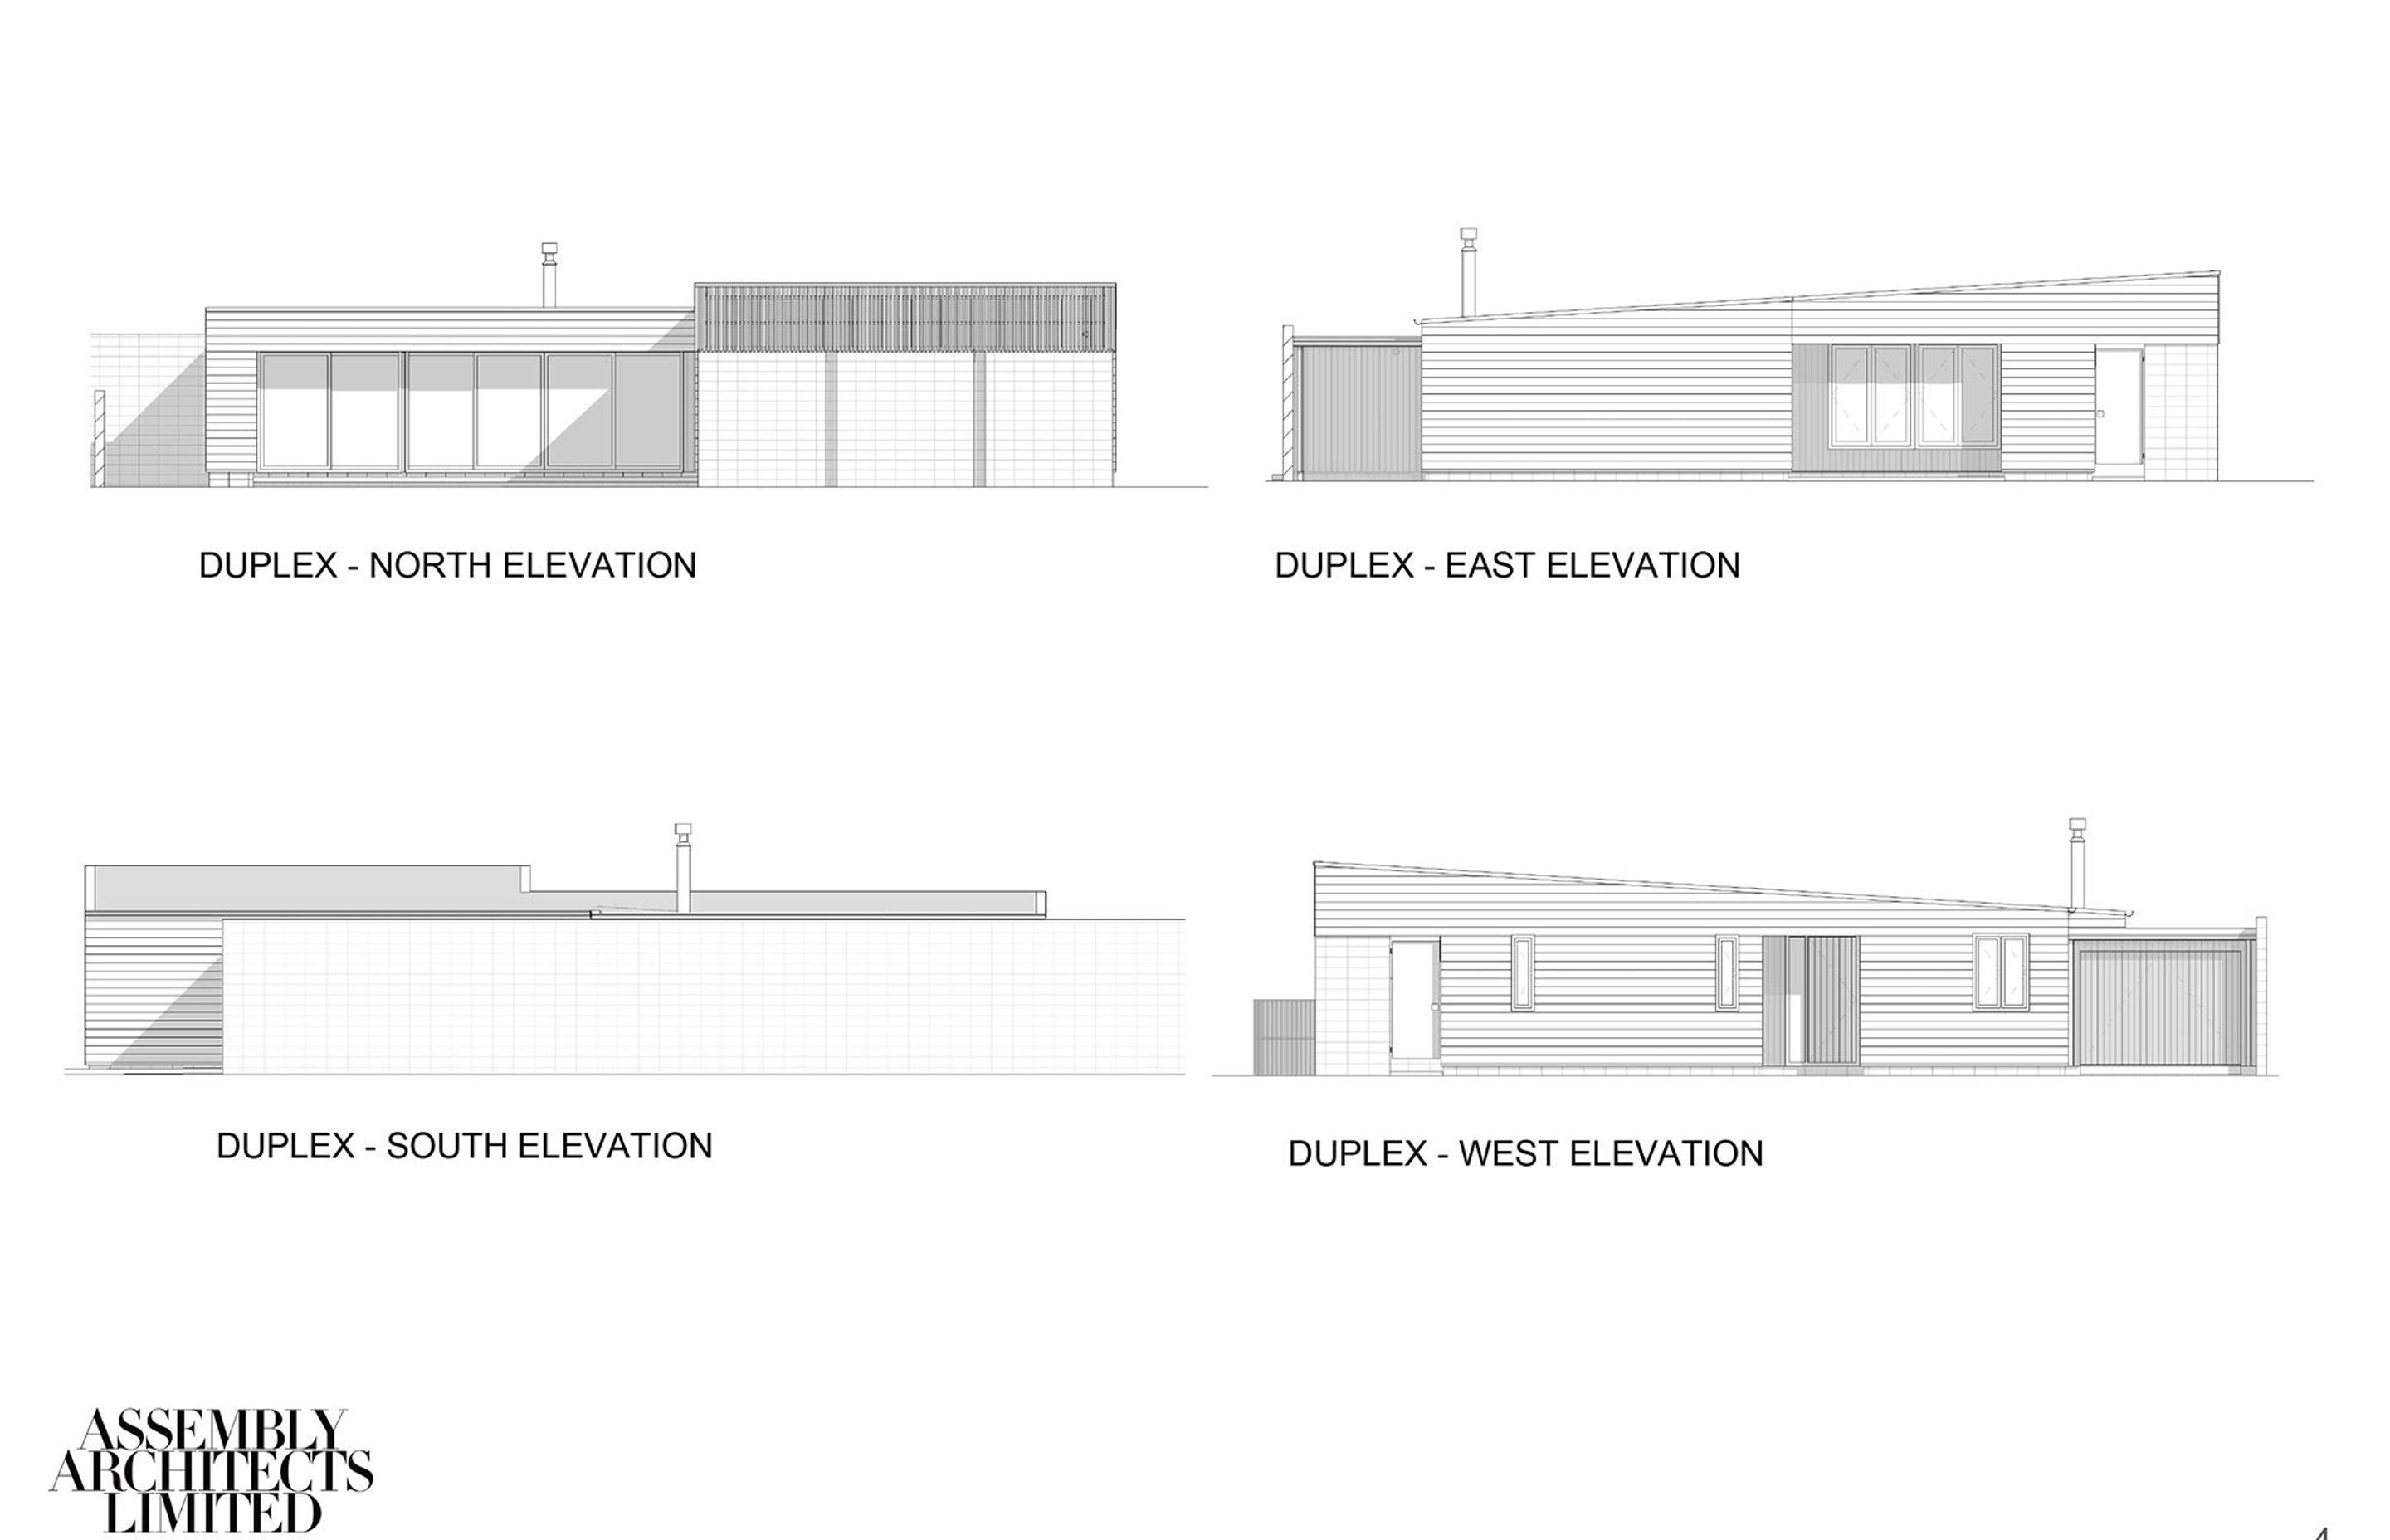 Elevations of a typical duplex dwelling by Assembly Architects.